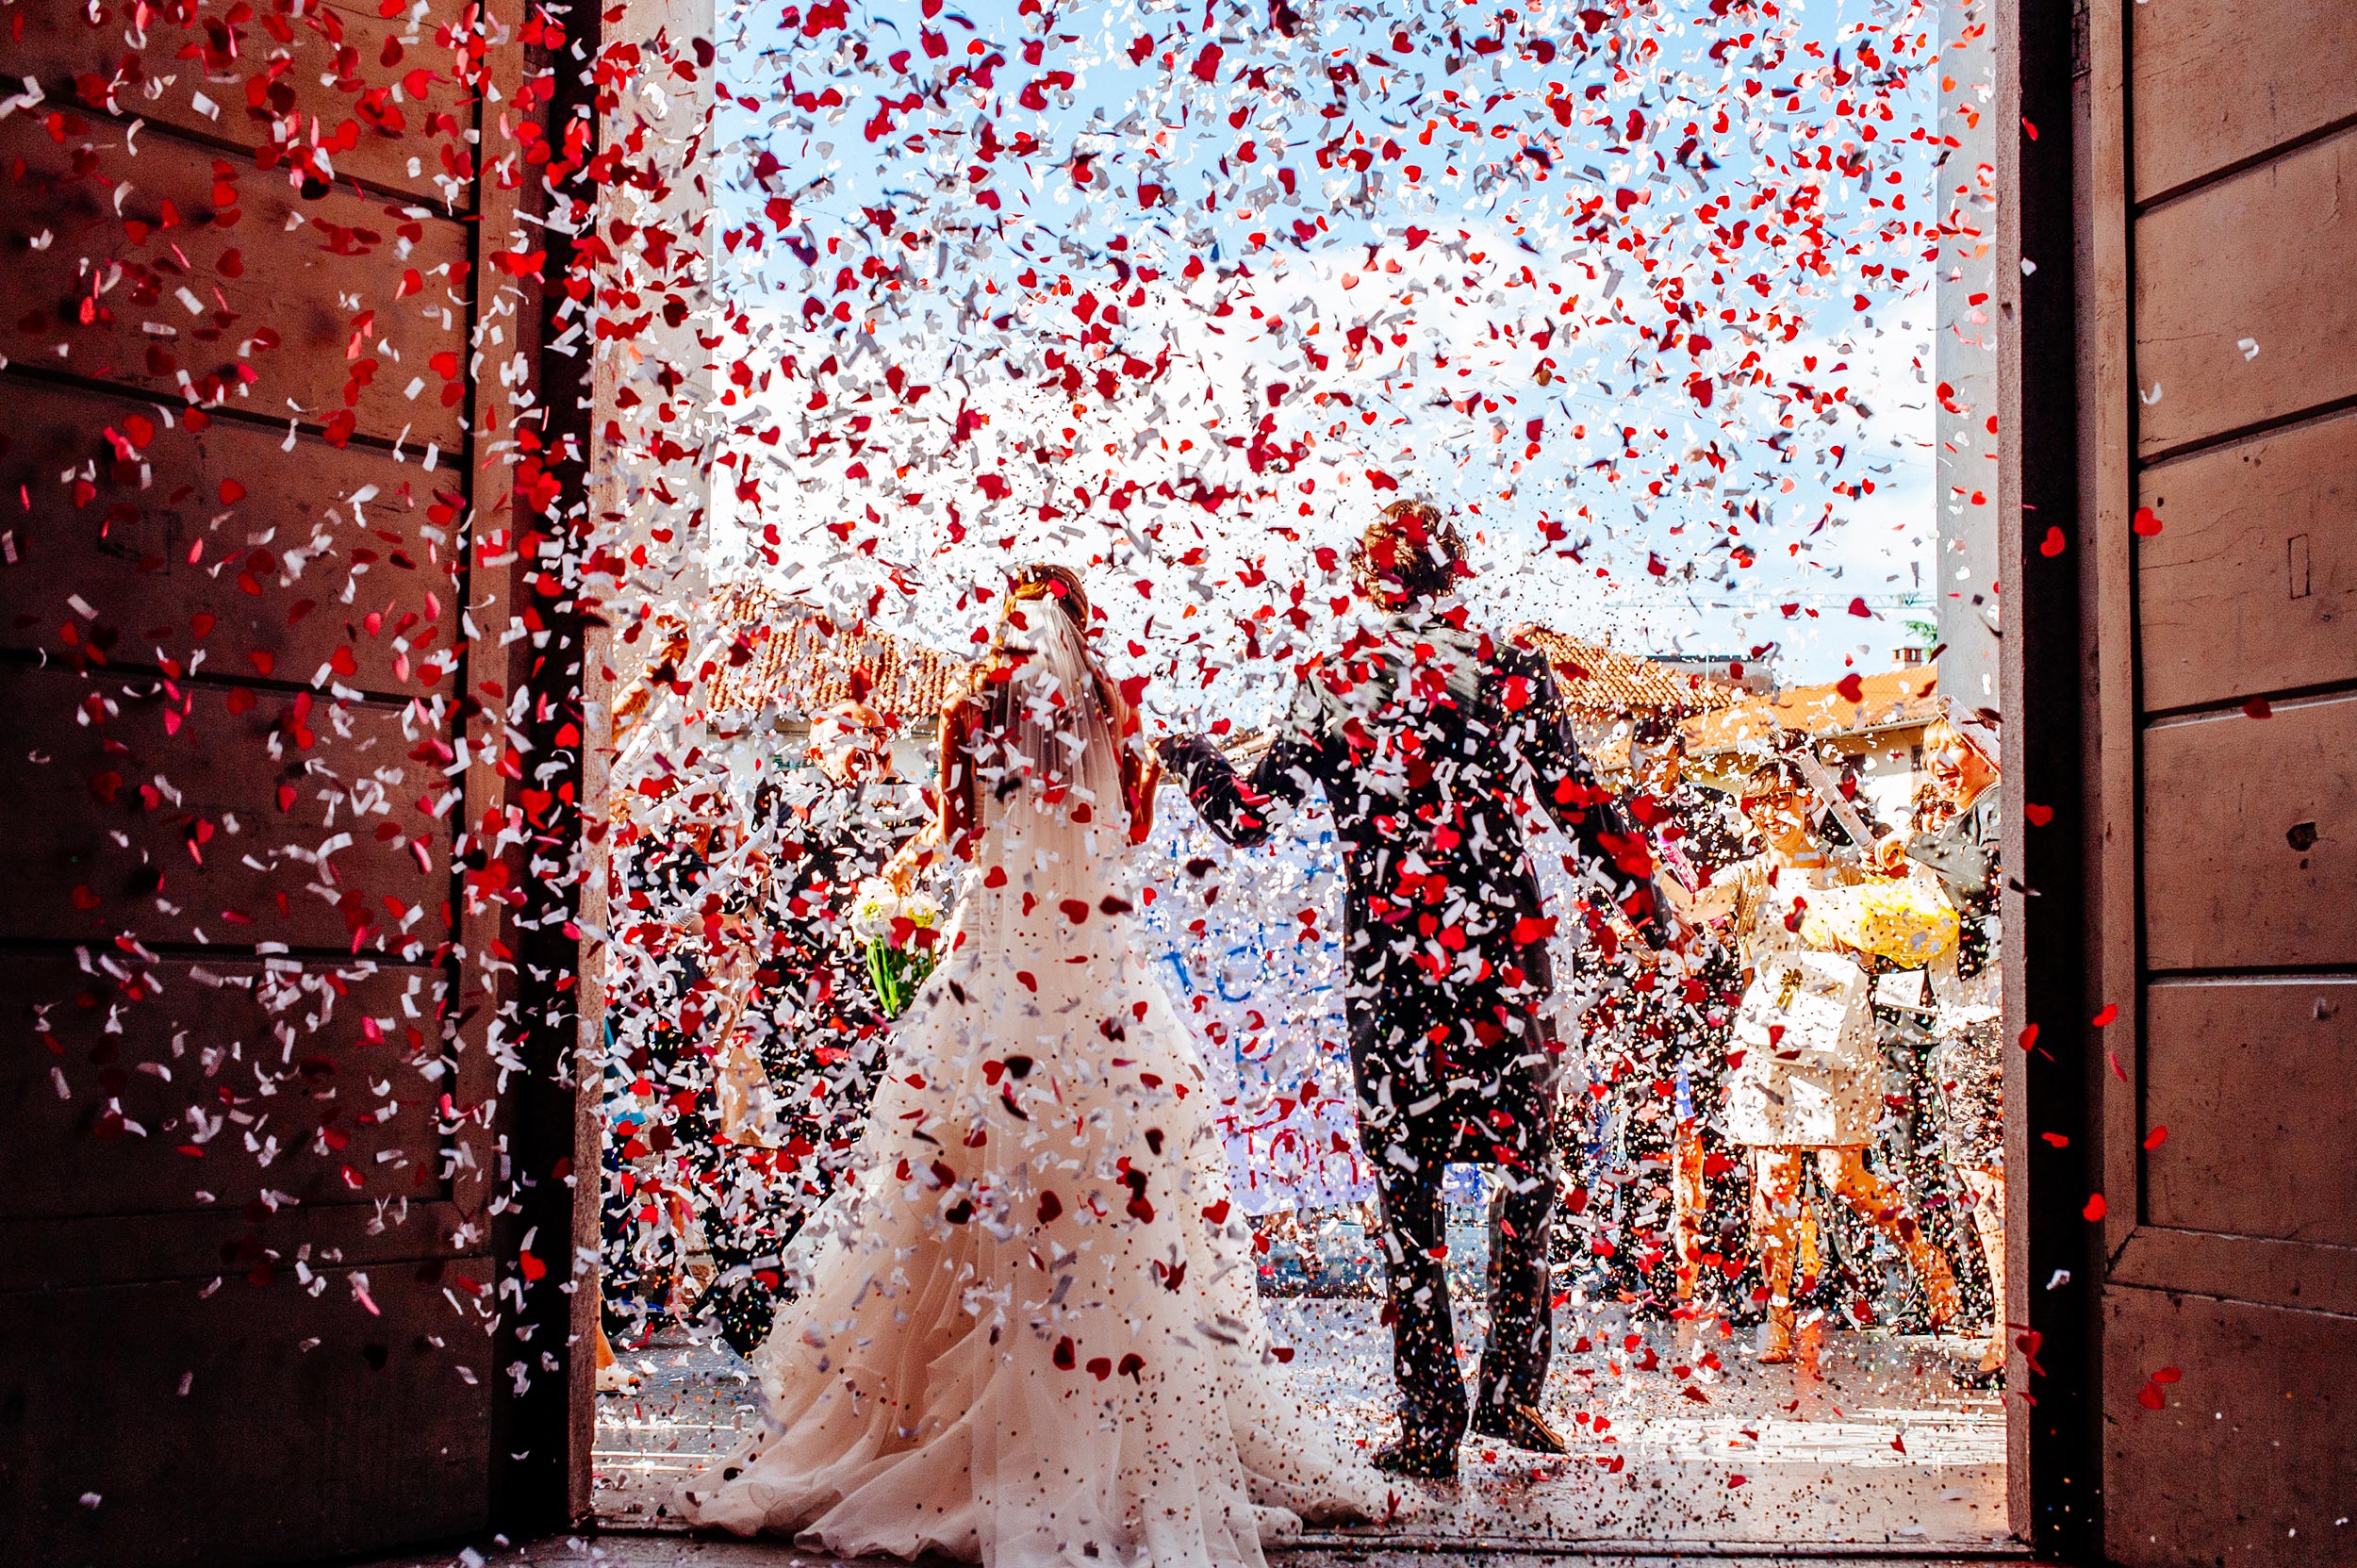 confetti-cannons-red-hearts-wedding-italy-church-exit.jpg